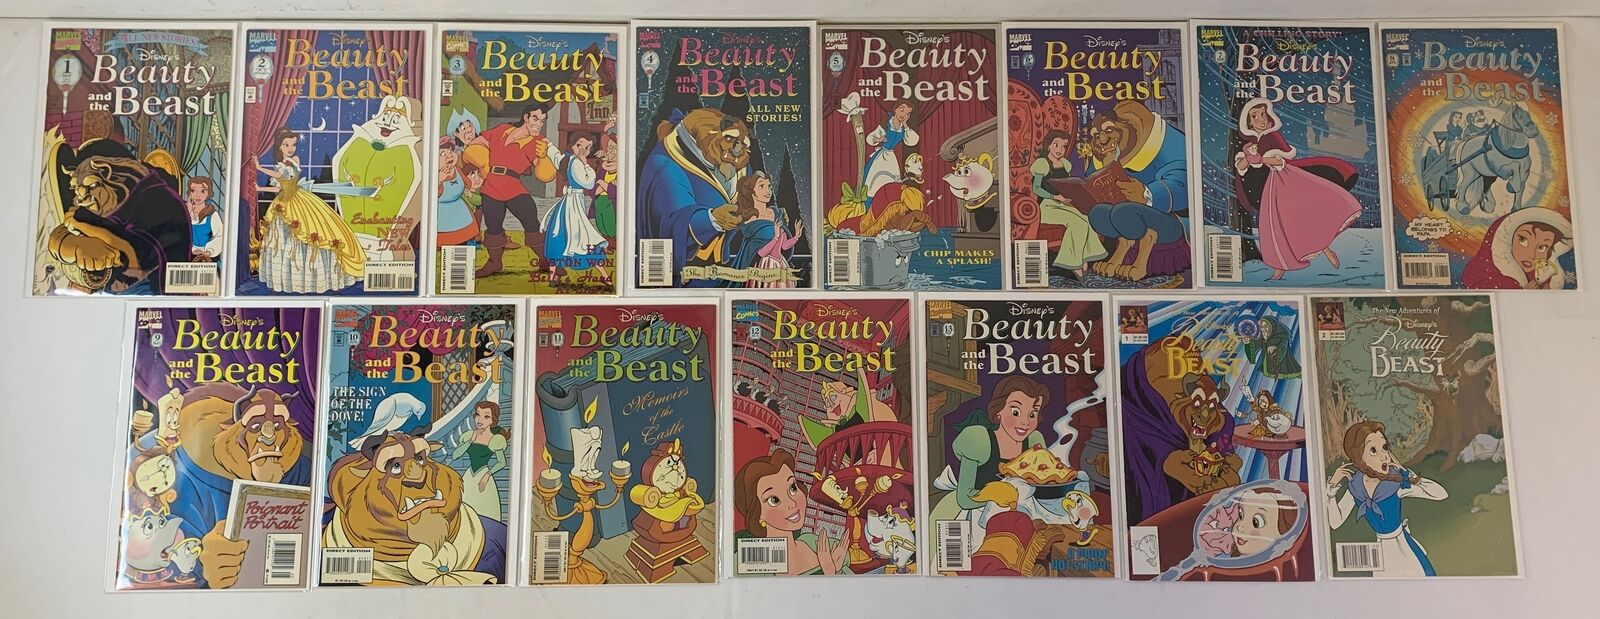 Disney BEAUTY AND THE BEAST #1 2 3 4 5 6 7 8 9 10 11 12 13 ~ FULL SET plus more